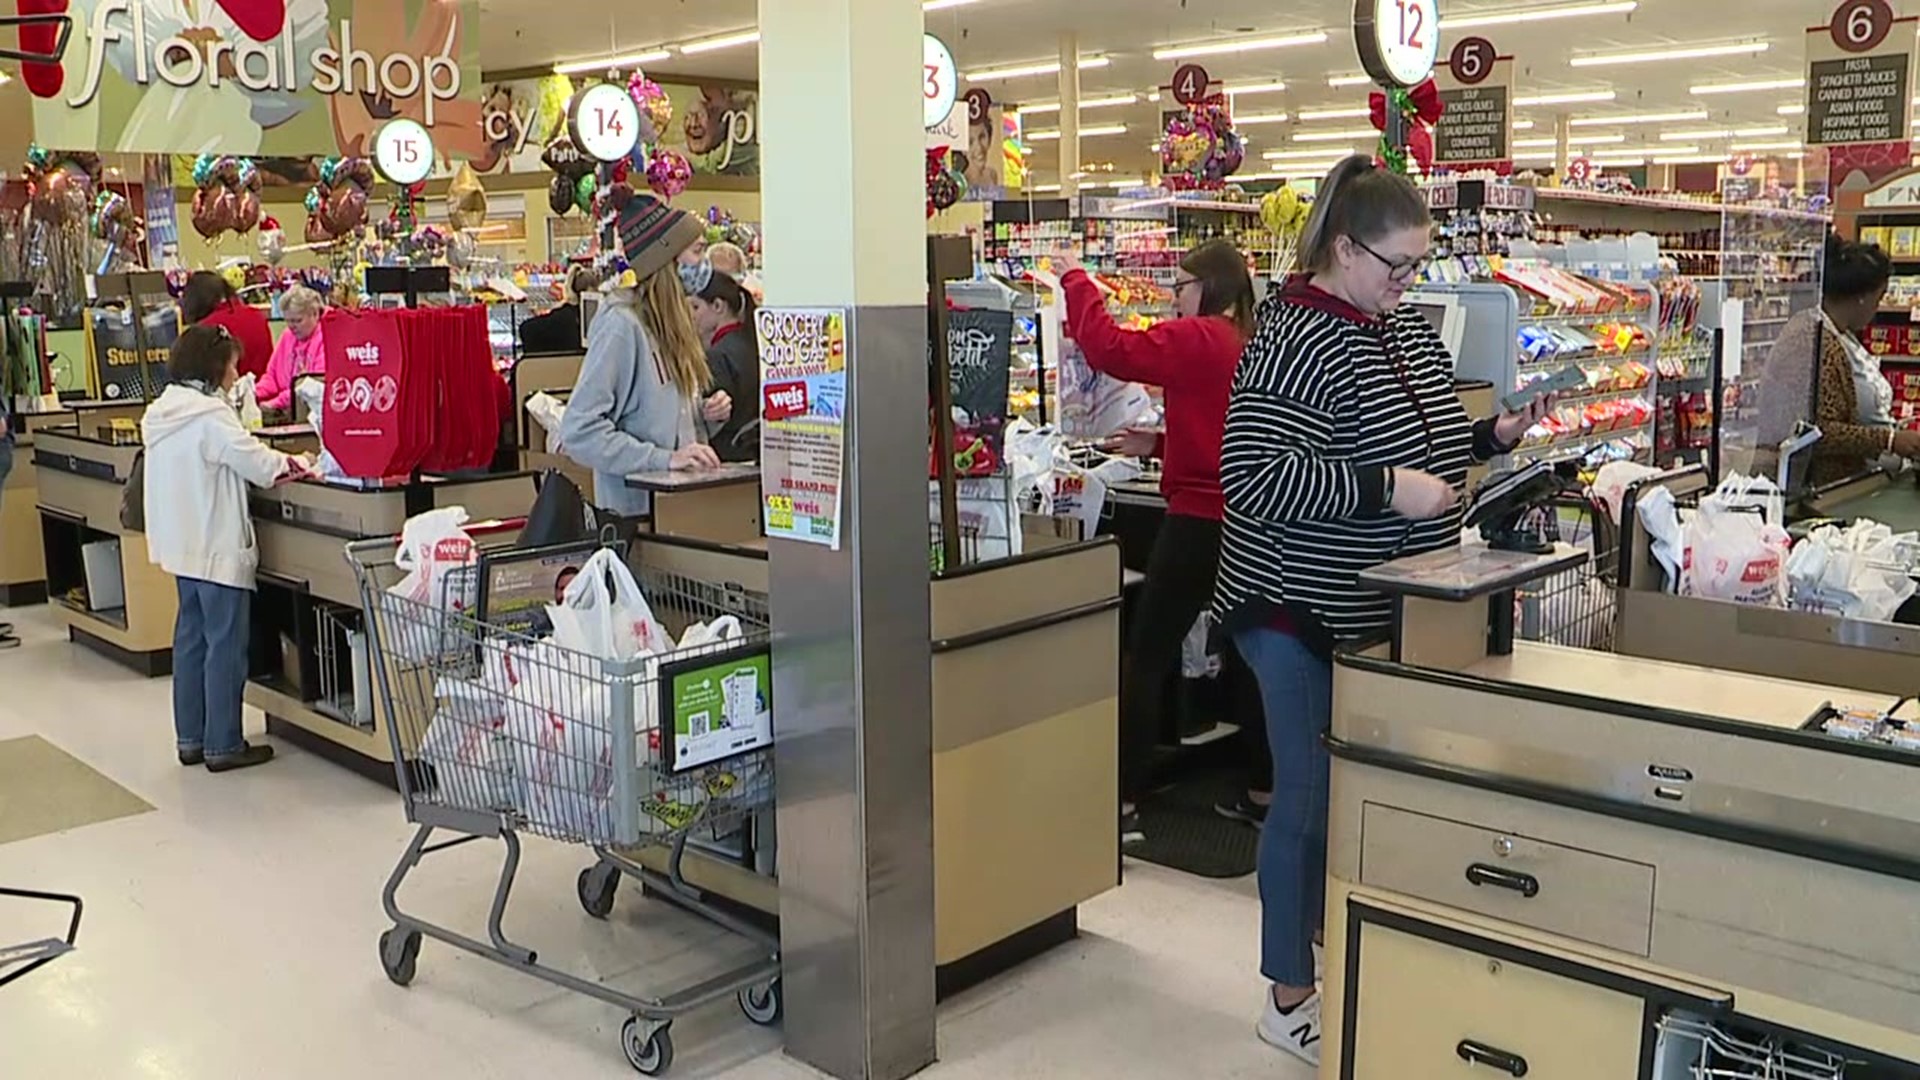 It's been a busy day for grocery stores as people pick up last-minute items for Thanksgiving dinner.